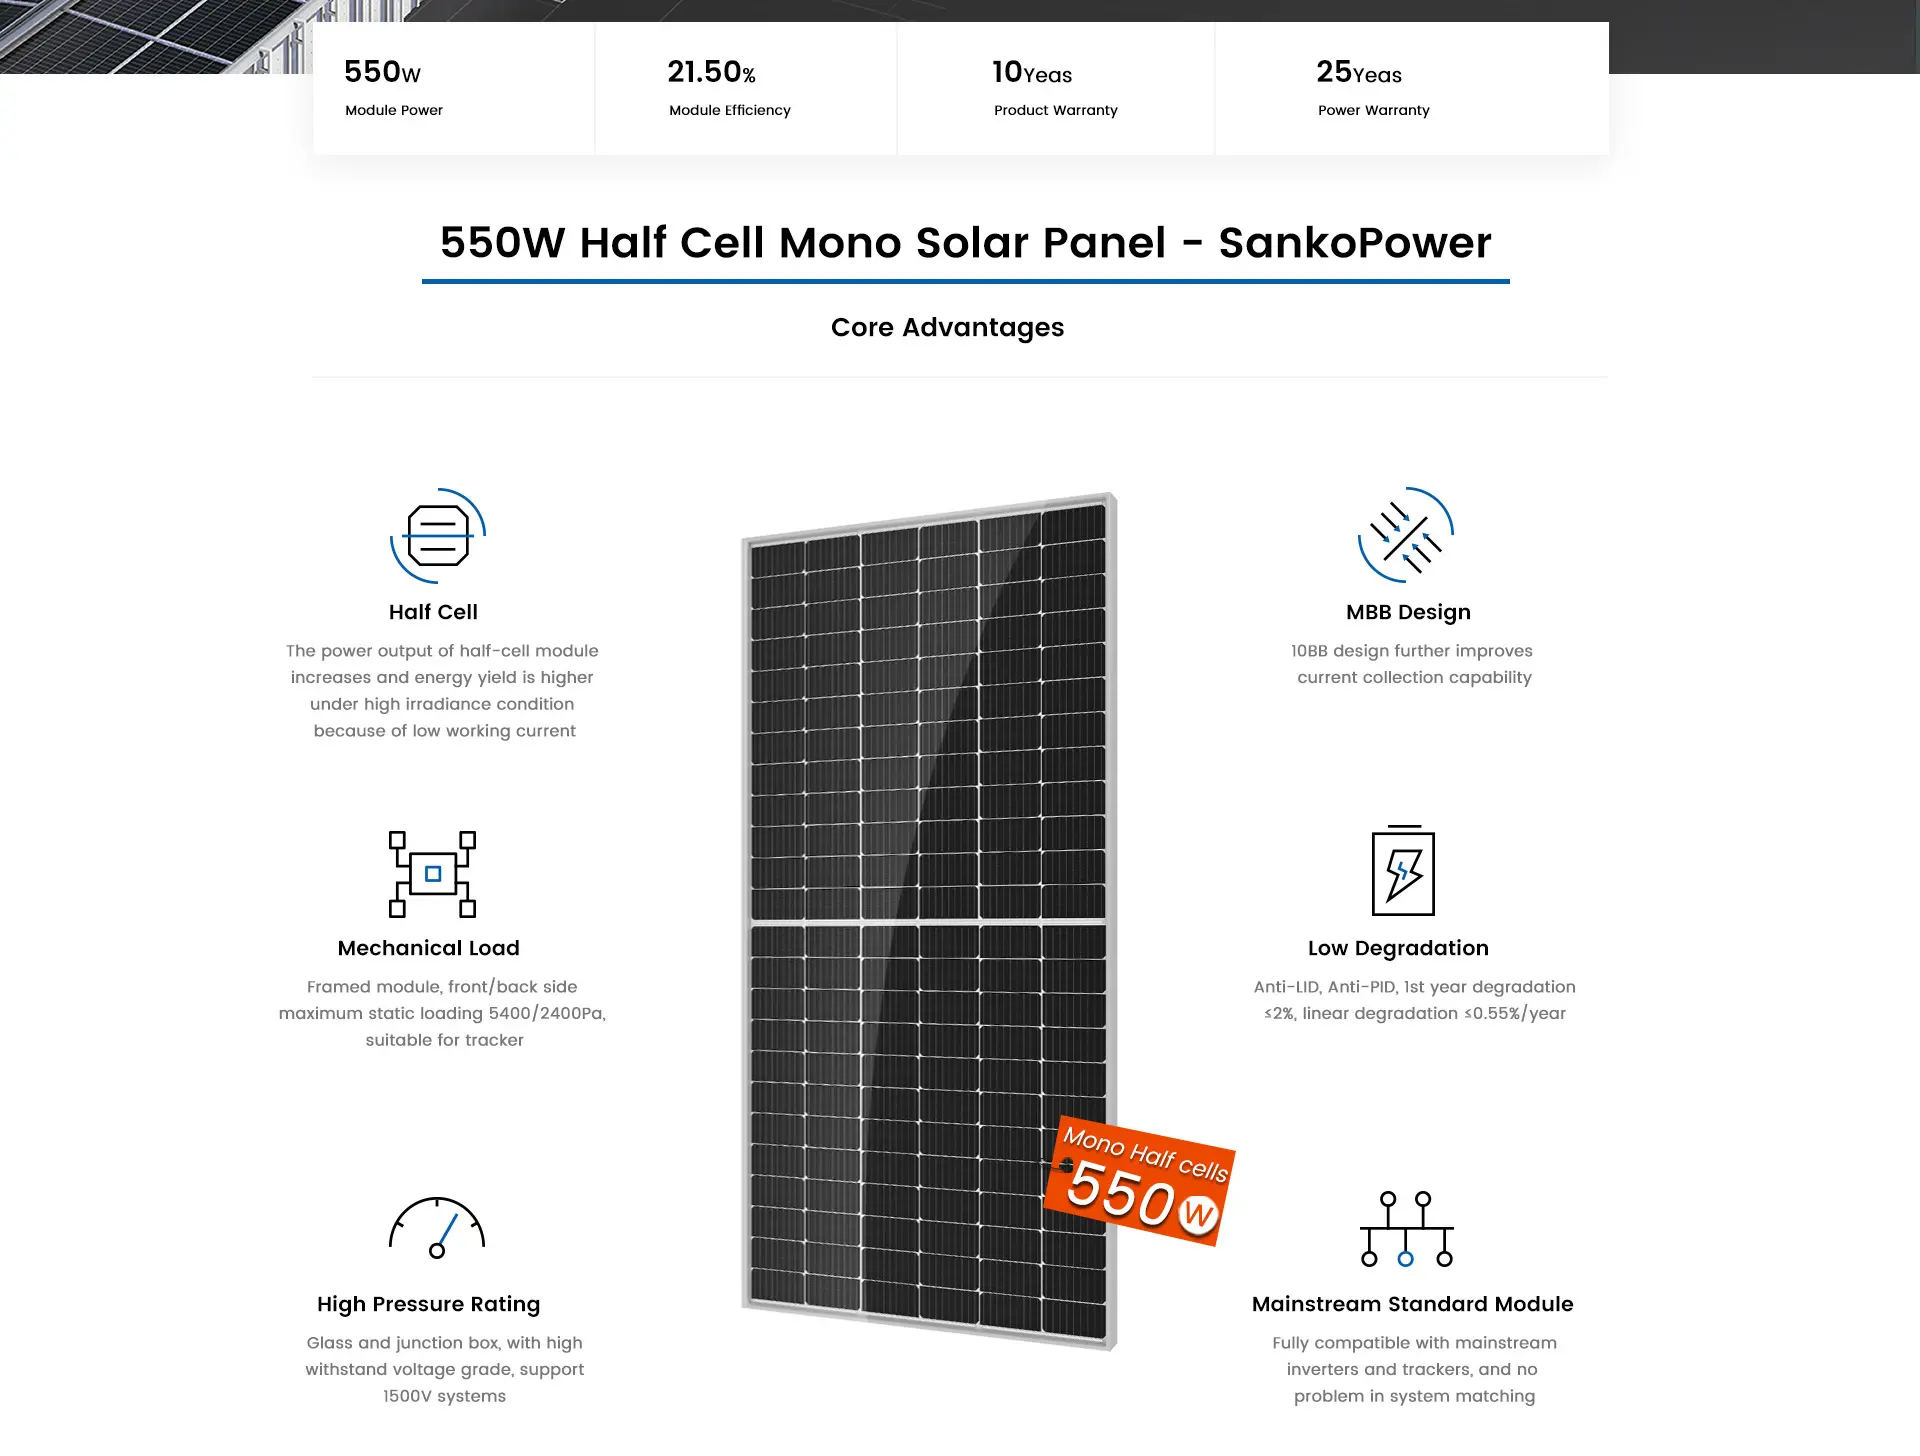 550w solar panel dimensions - What are the dimensions of the Longi 550W panel